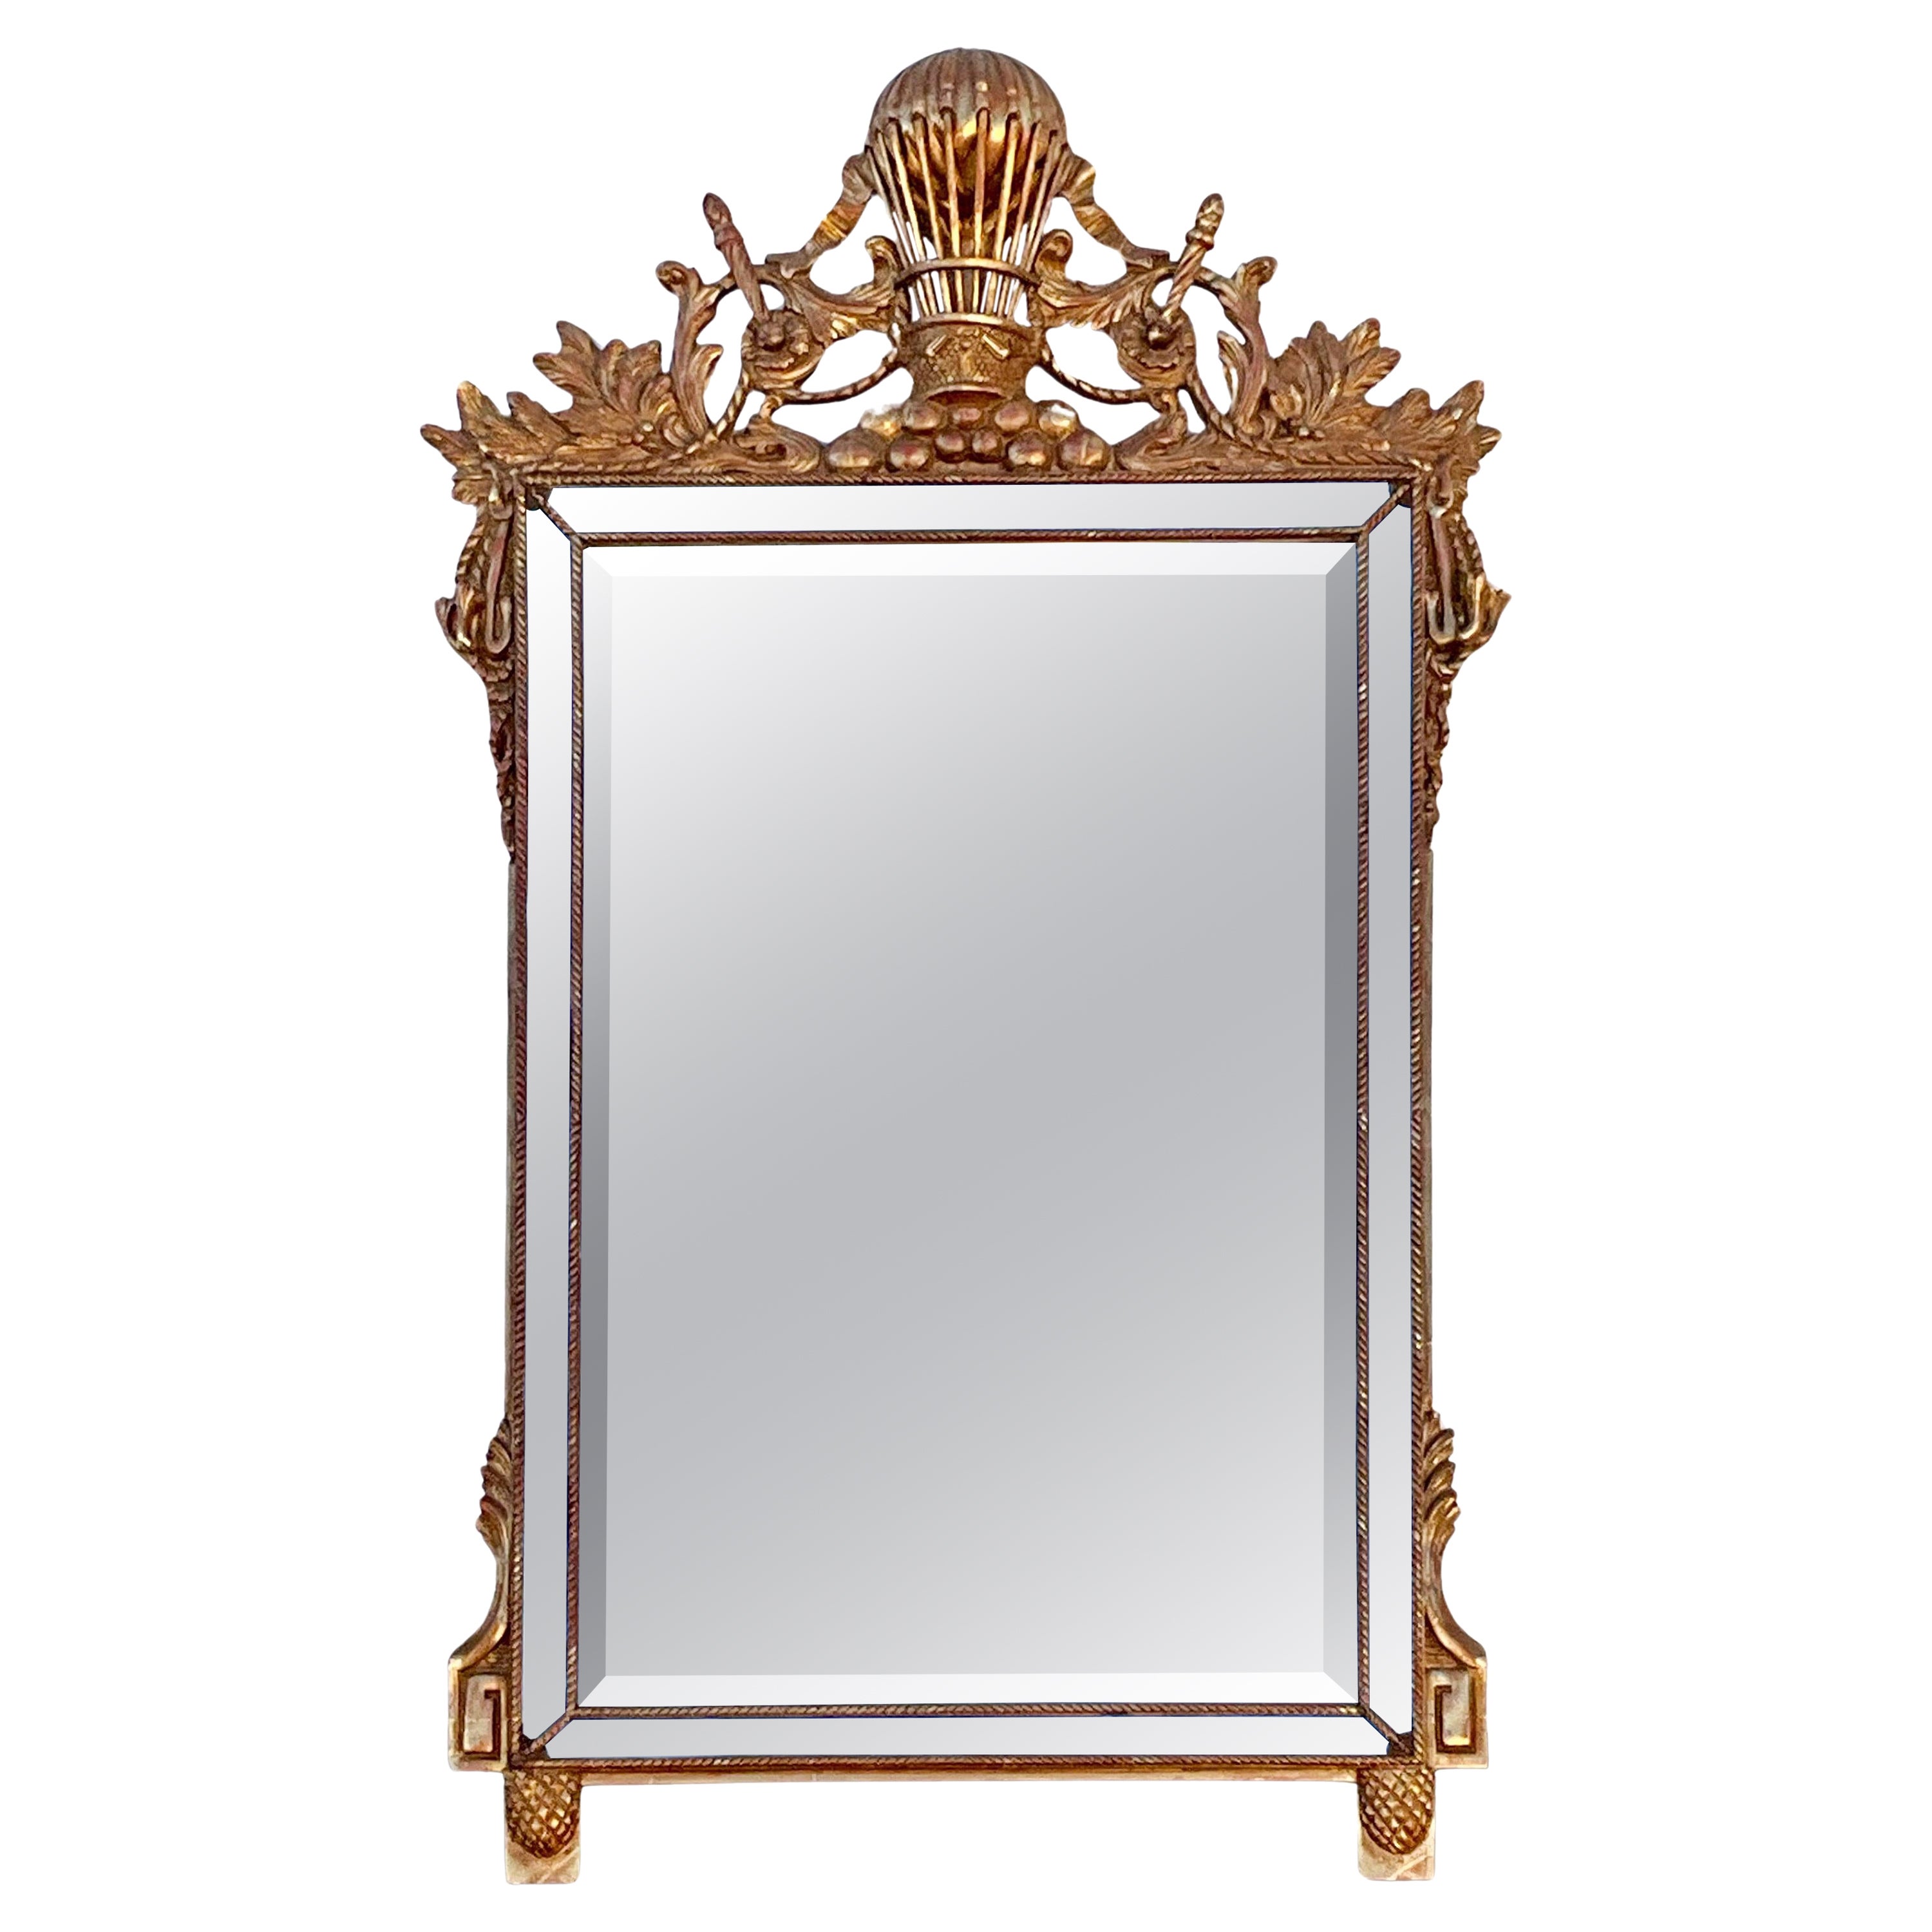 Italian Carved Giltwood Balloon Form French Empire Inspired Wall Mirror For Sale